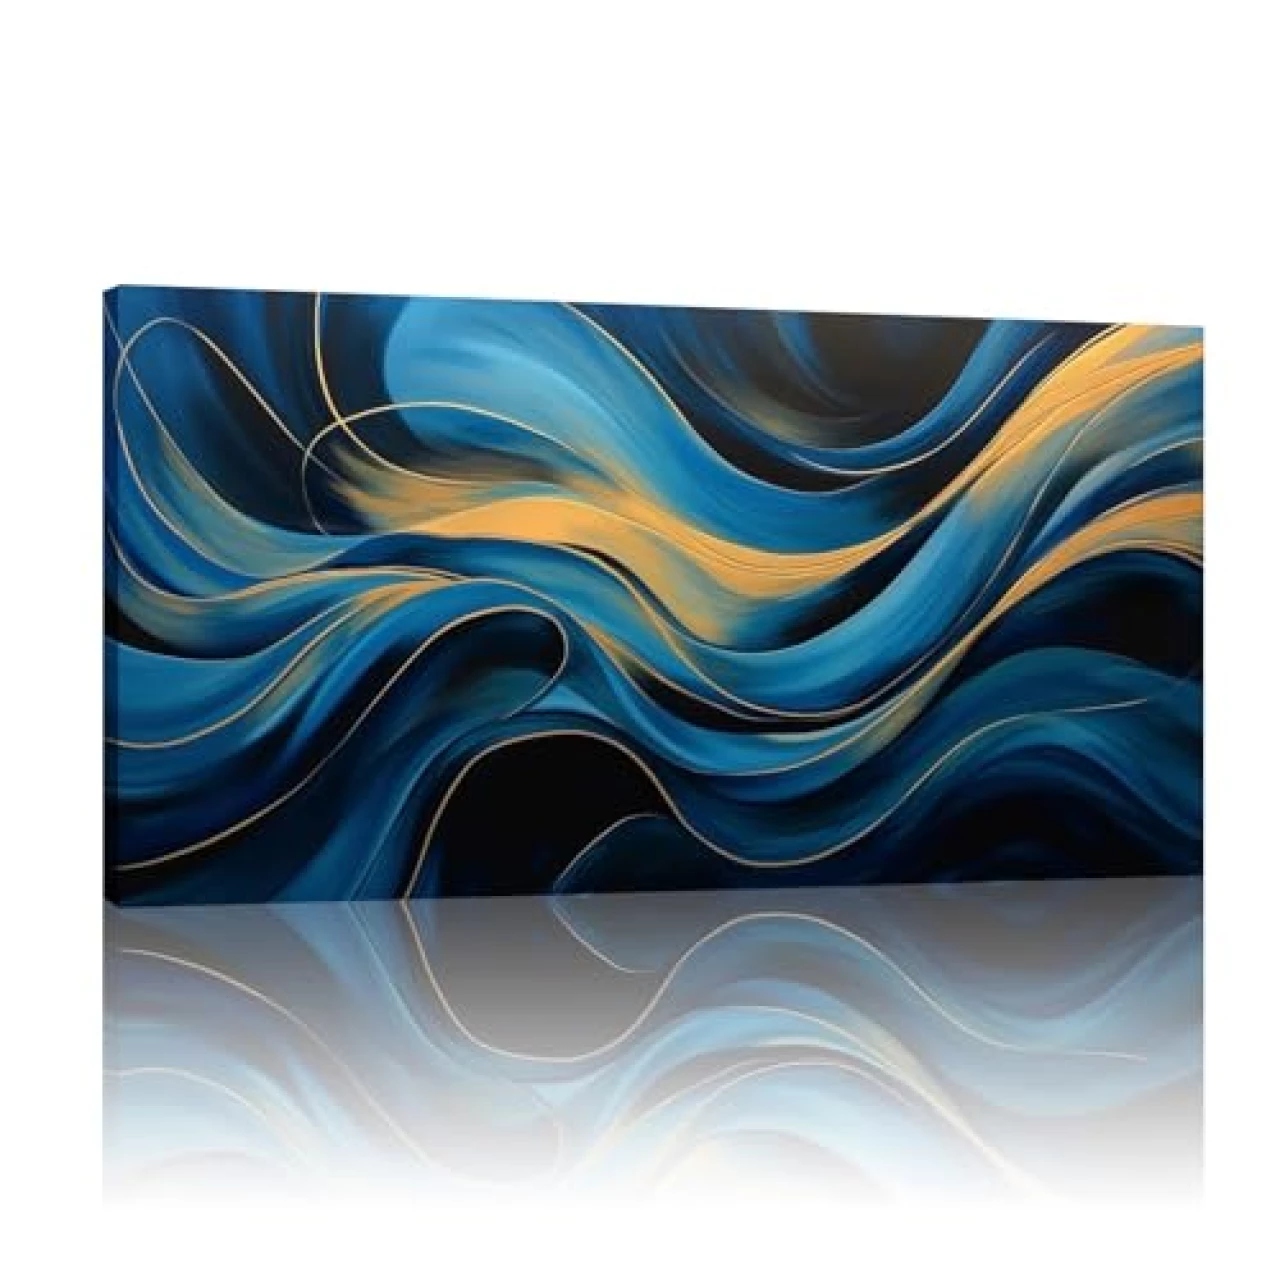 KQZVCU Blue Wall Art Abstract Textured Painting on Canvas Large Wall Art